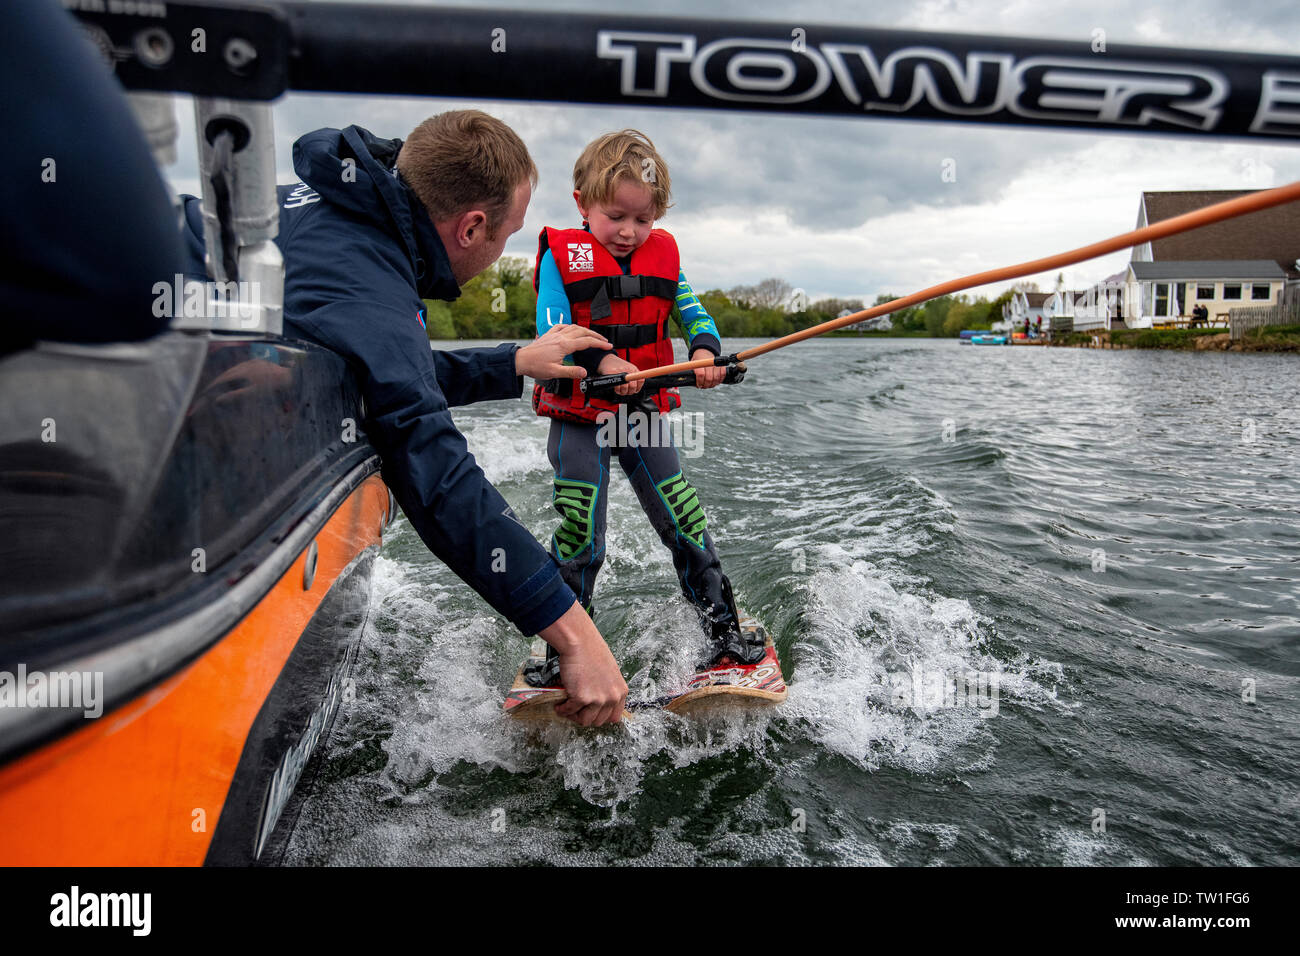 A five year old boy learns to waterski on a lake in the Cotswolds, Gloucestershire, England. Stock Photo